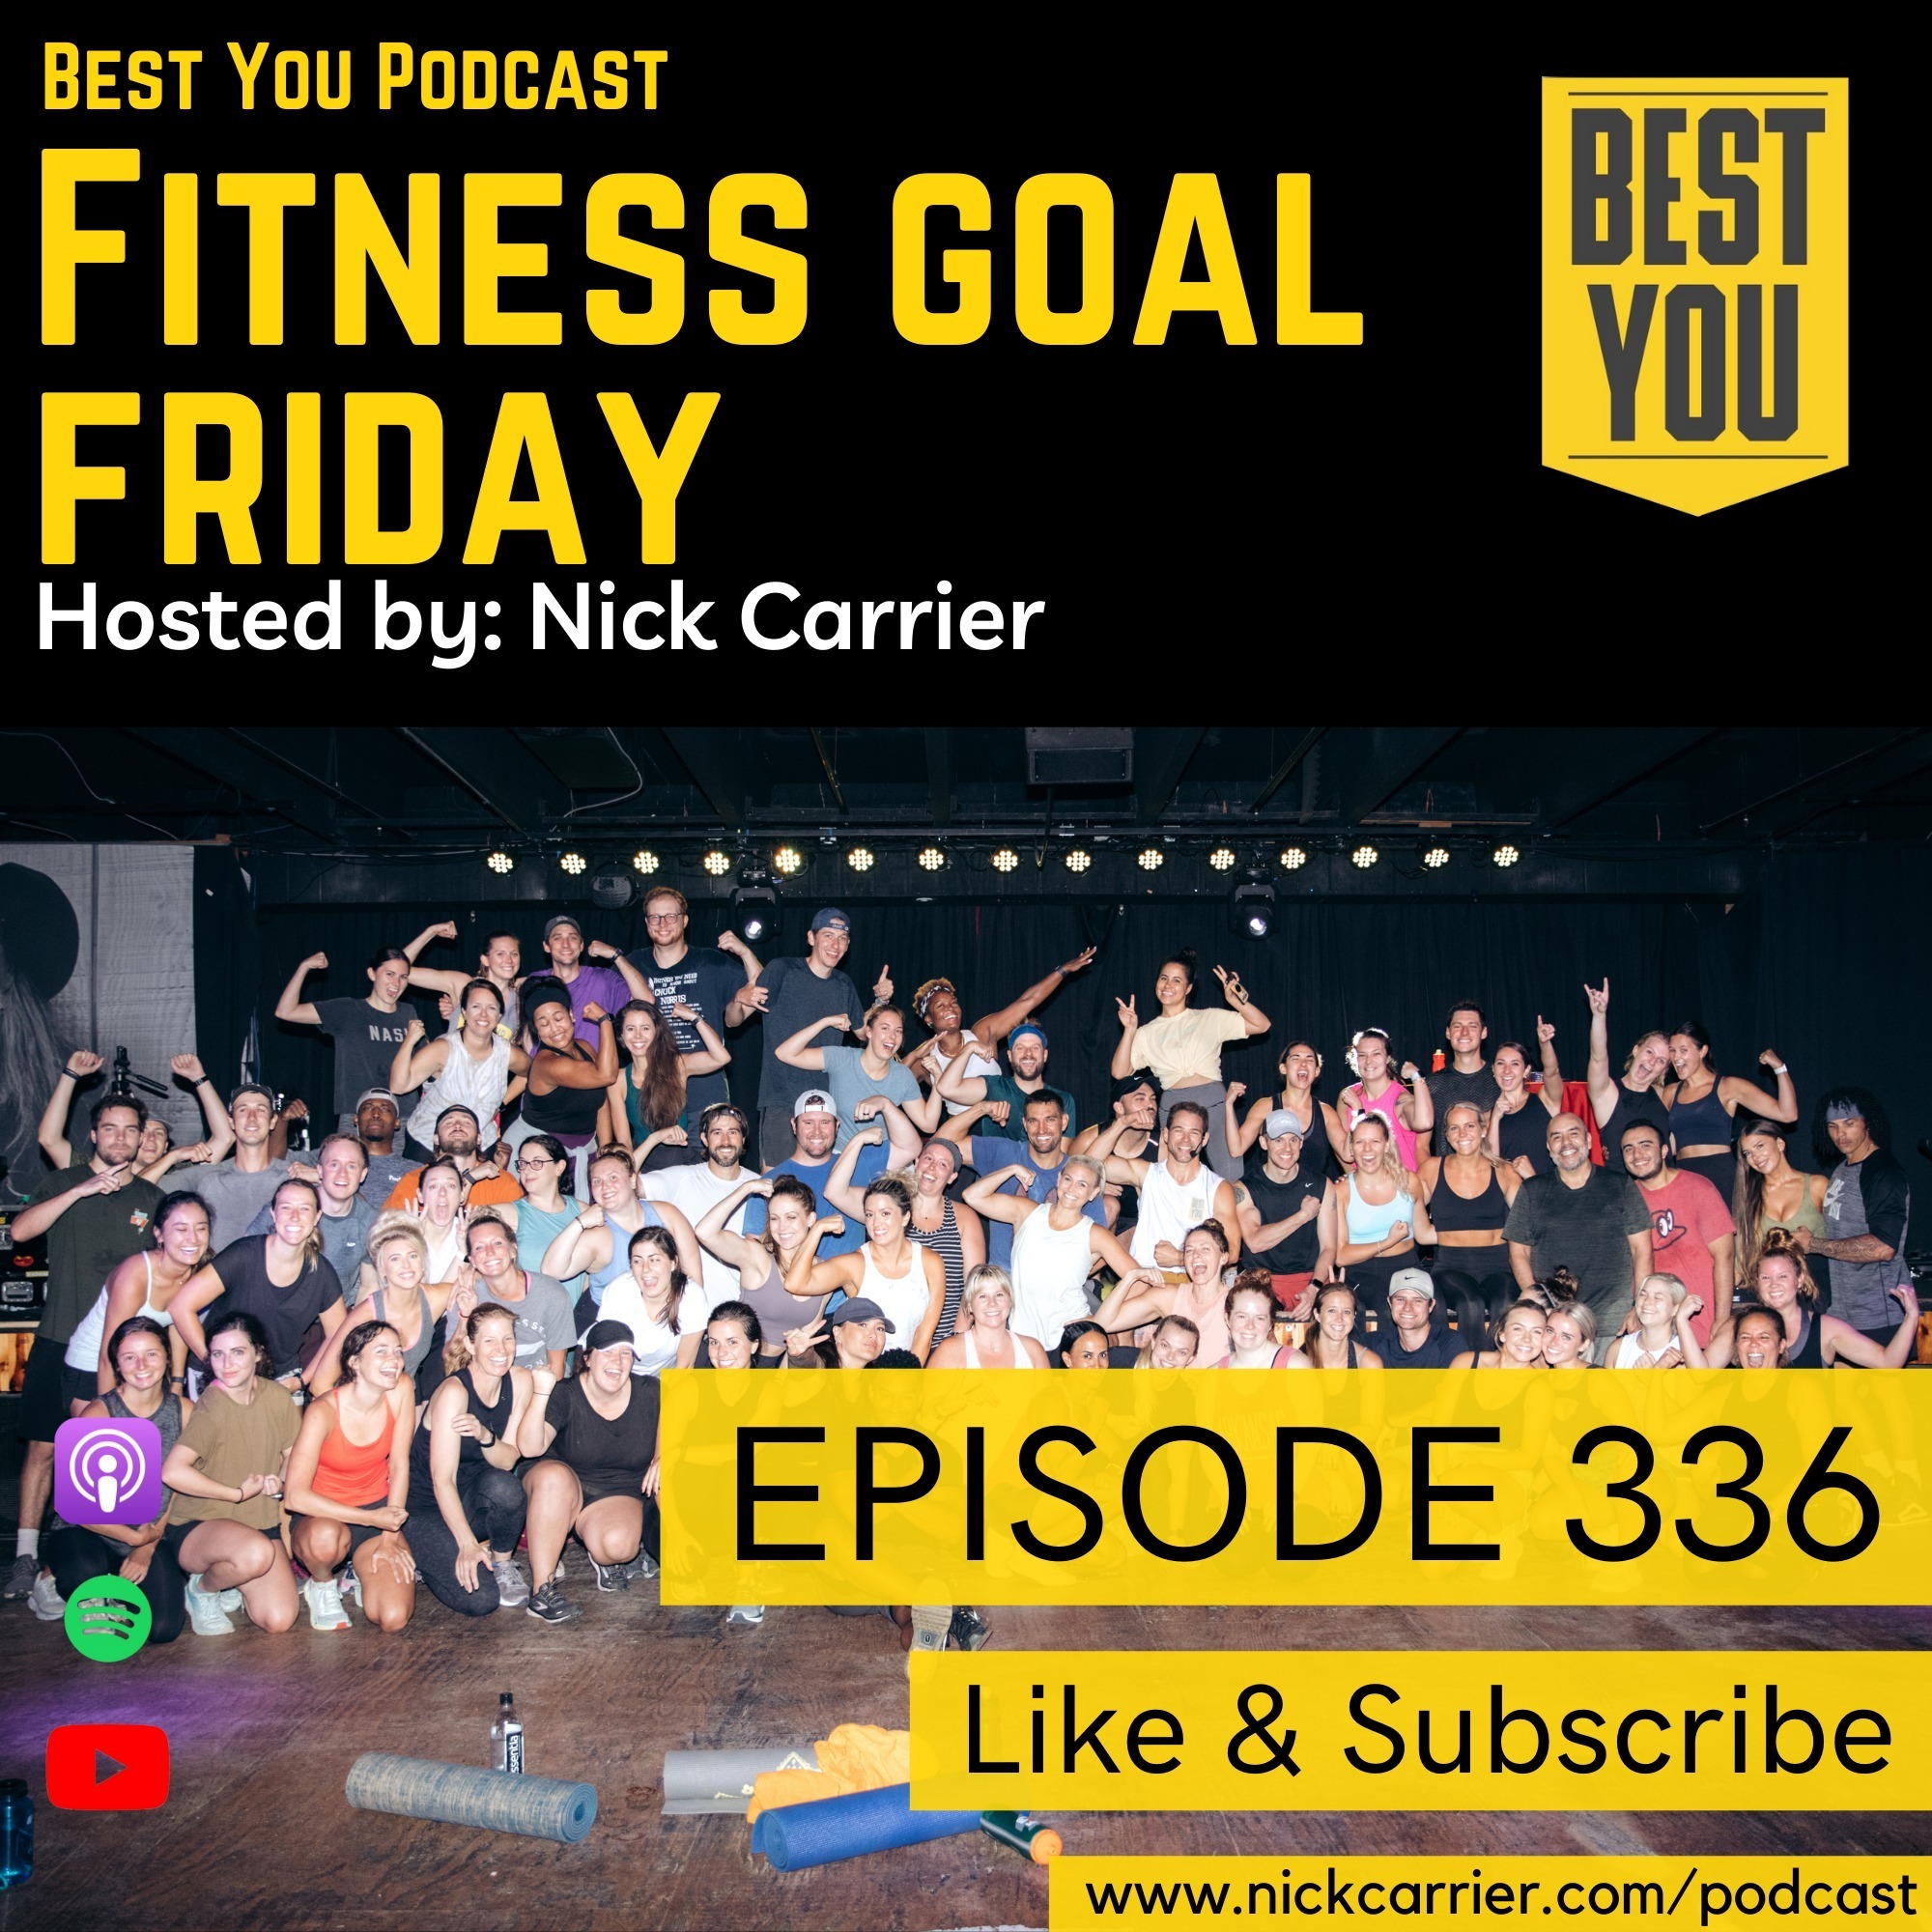 Fitness Goal Friday - How to Build Self-Confidence